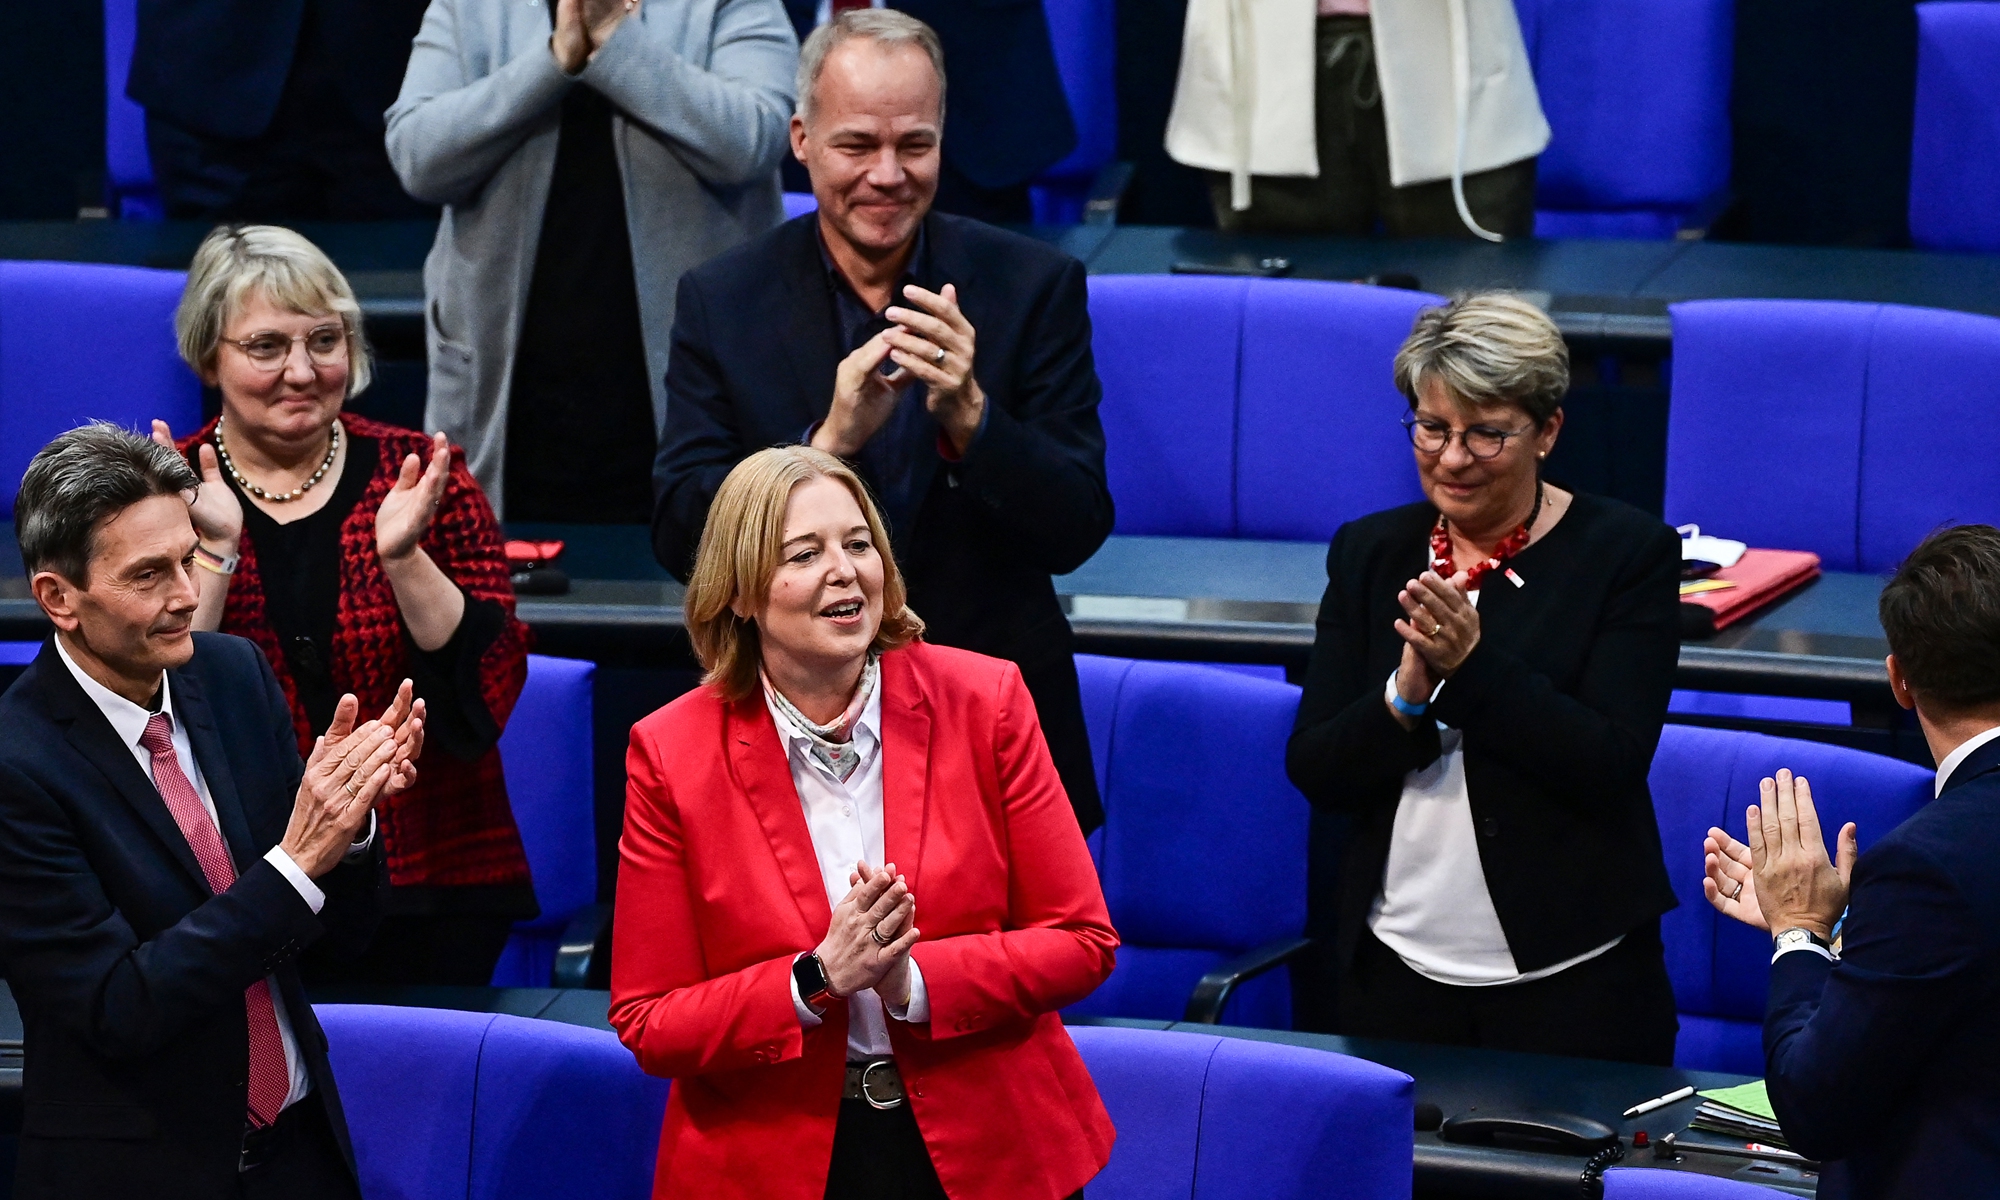 Baerbel Bas (front center) is applauded after being elected as new president of the Bundestag (lower house of parliament) on October 26, 2021, during a constituent session of Germany's new parliament at the Bundestag in Berlin. Delegates of the Bundestag will sit for the first time following the September elections, ushering in a post-Merkel era that is more female, younger and more ethnically diverse Photo: AFP